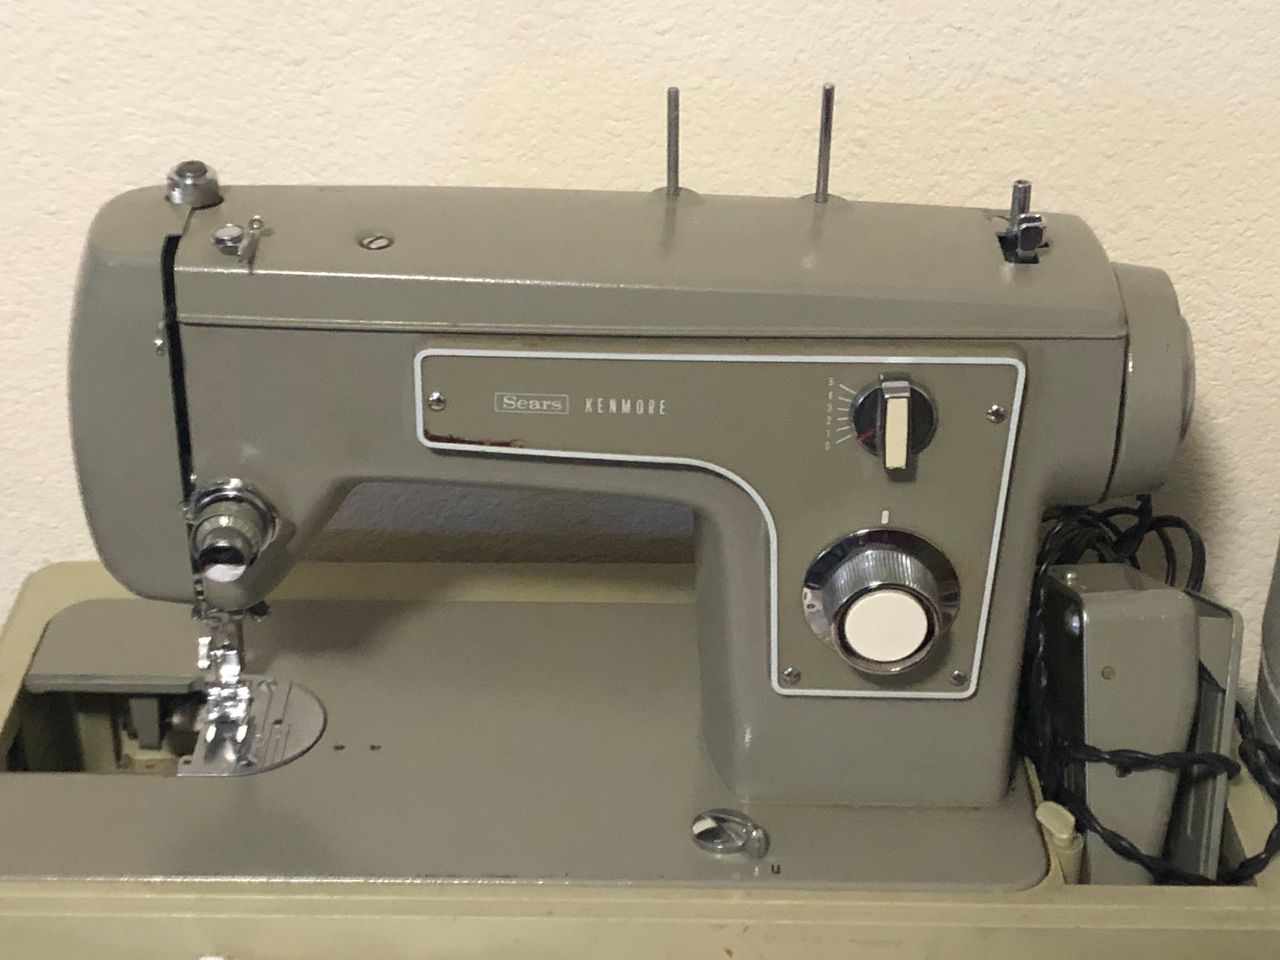 Omolayole’s sewing machine in his bedroom